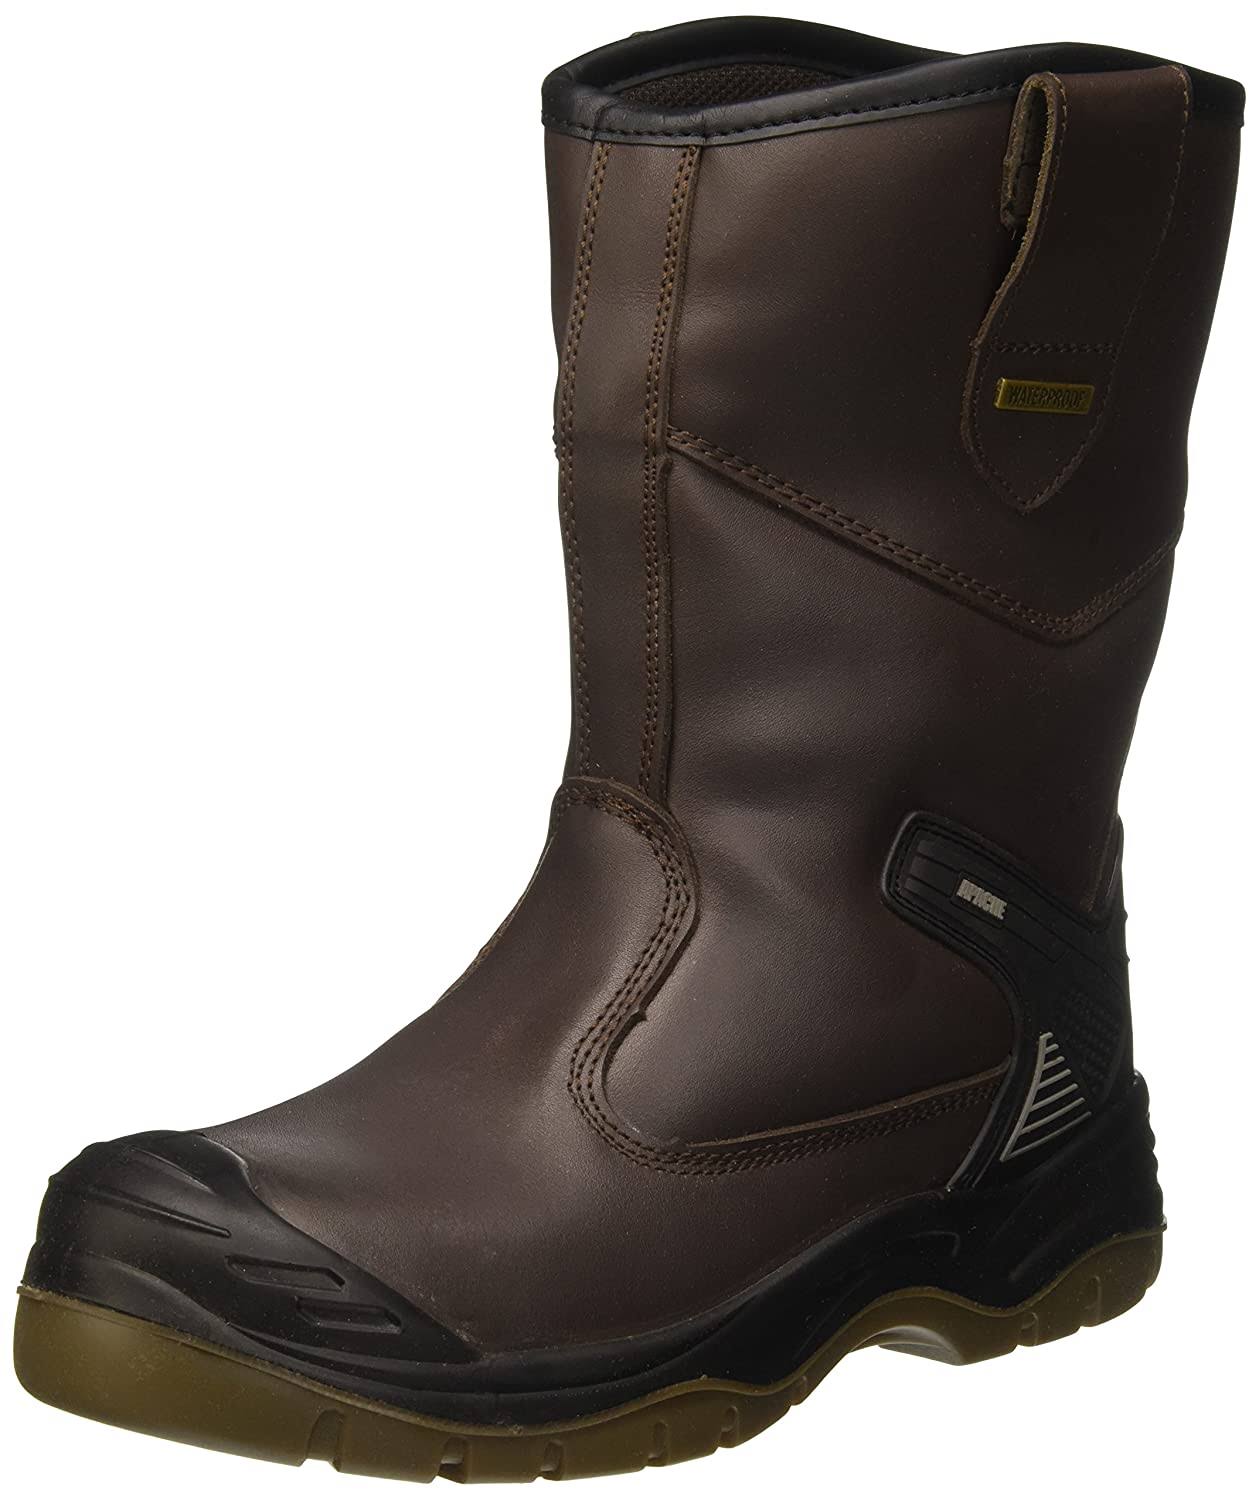 Apache Unisex Adult AP305 Safety Boots - Brown, Size 10 US